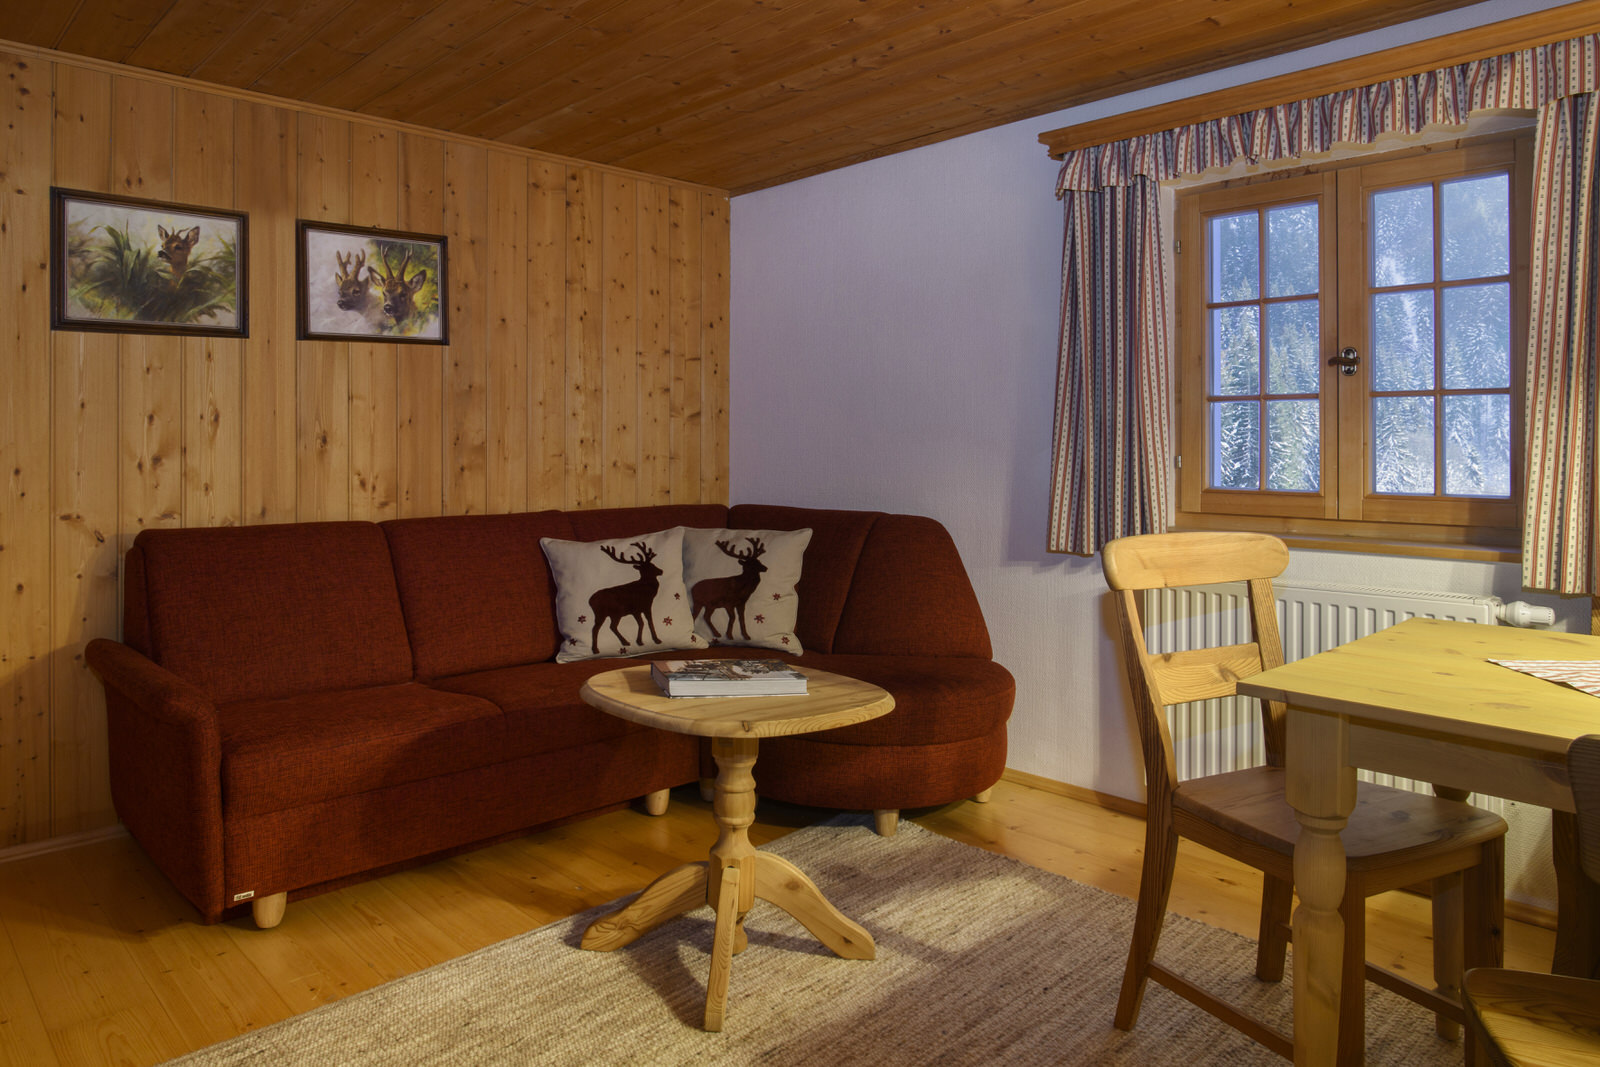 Bärenwald country lodge in the Montafon - living